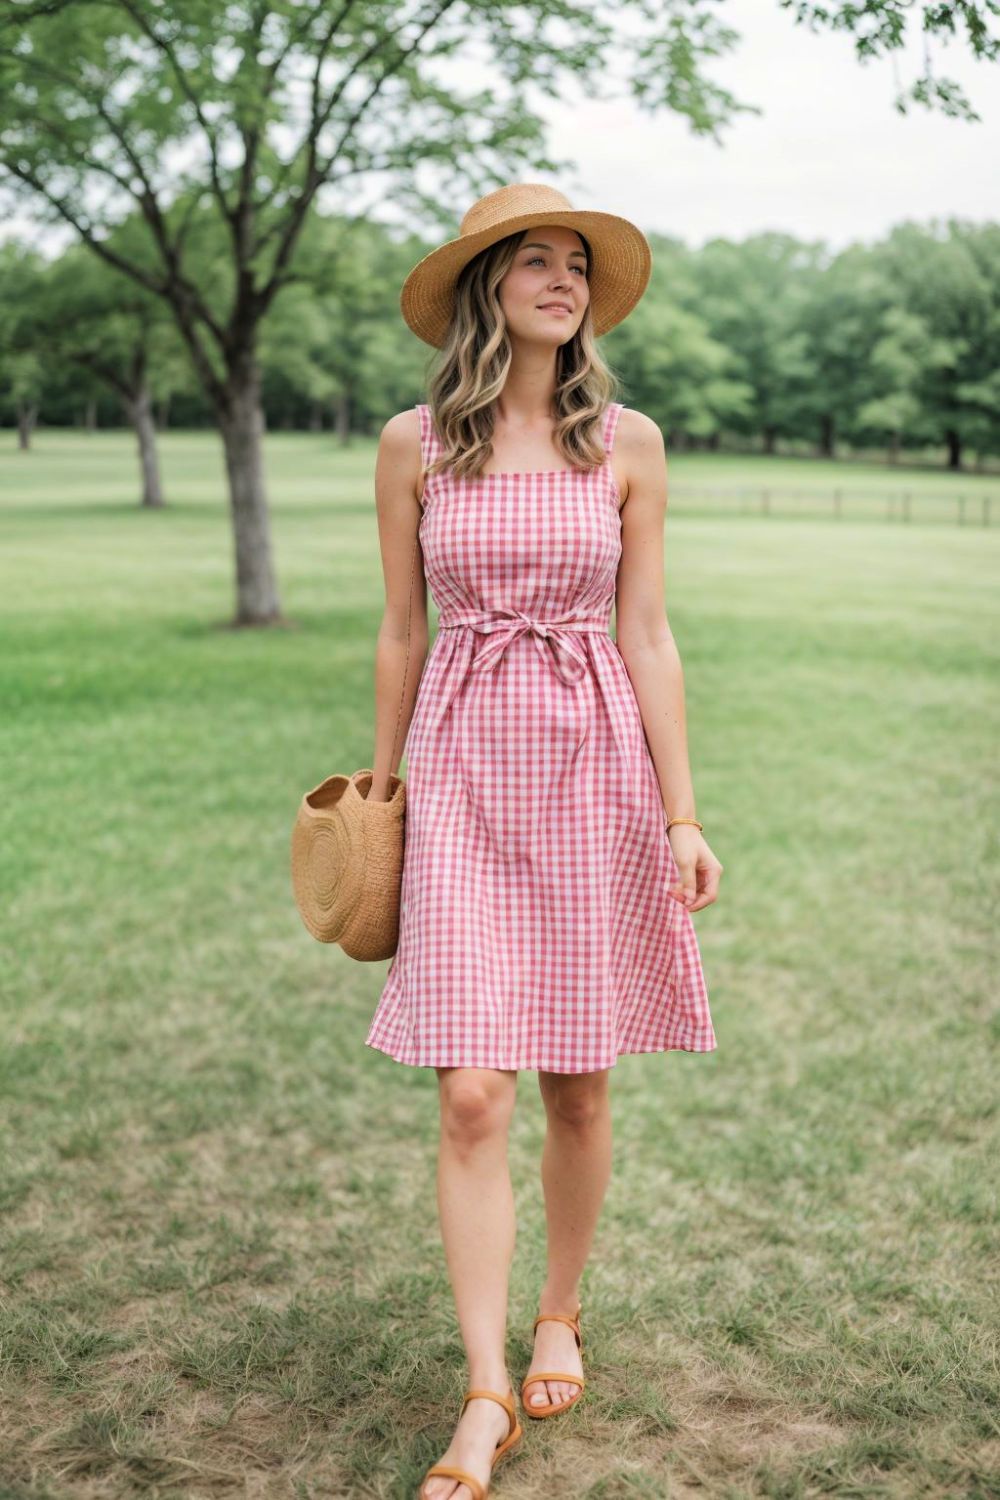 gingham dress and sandals for country concert